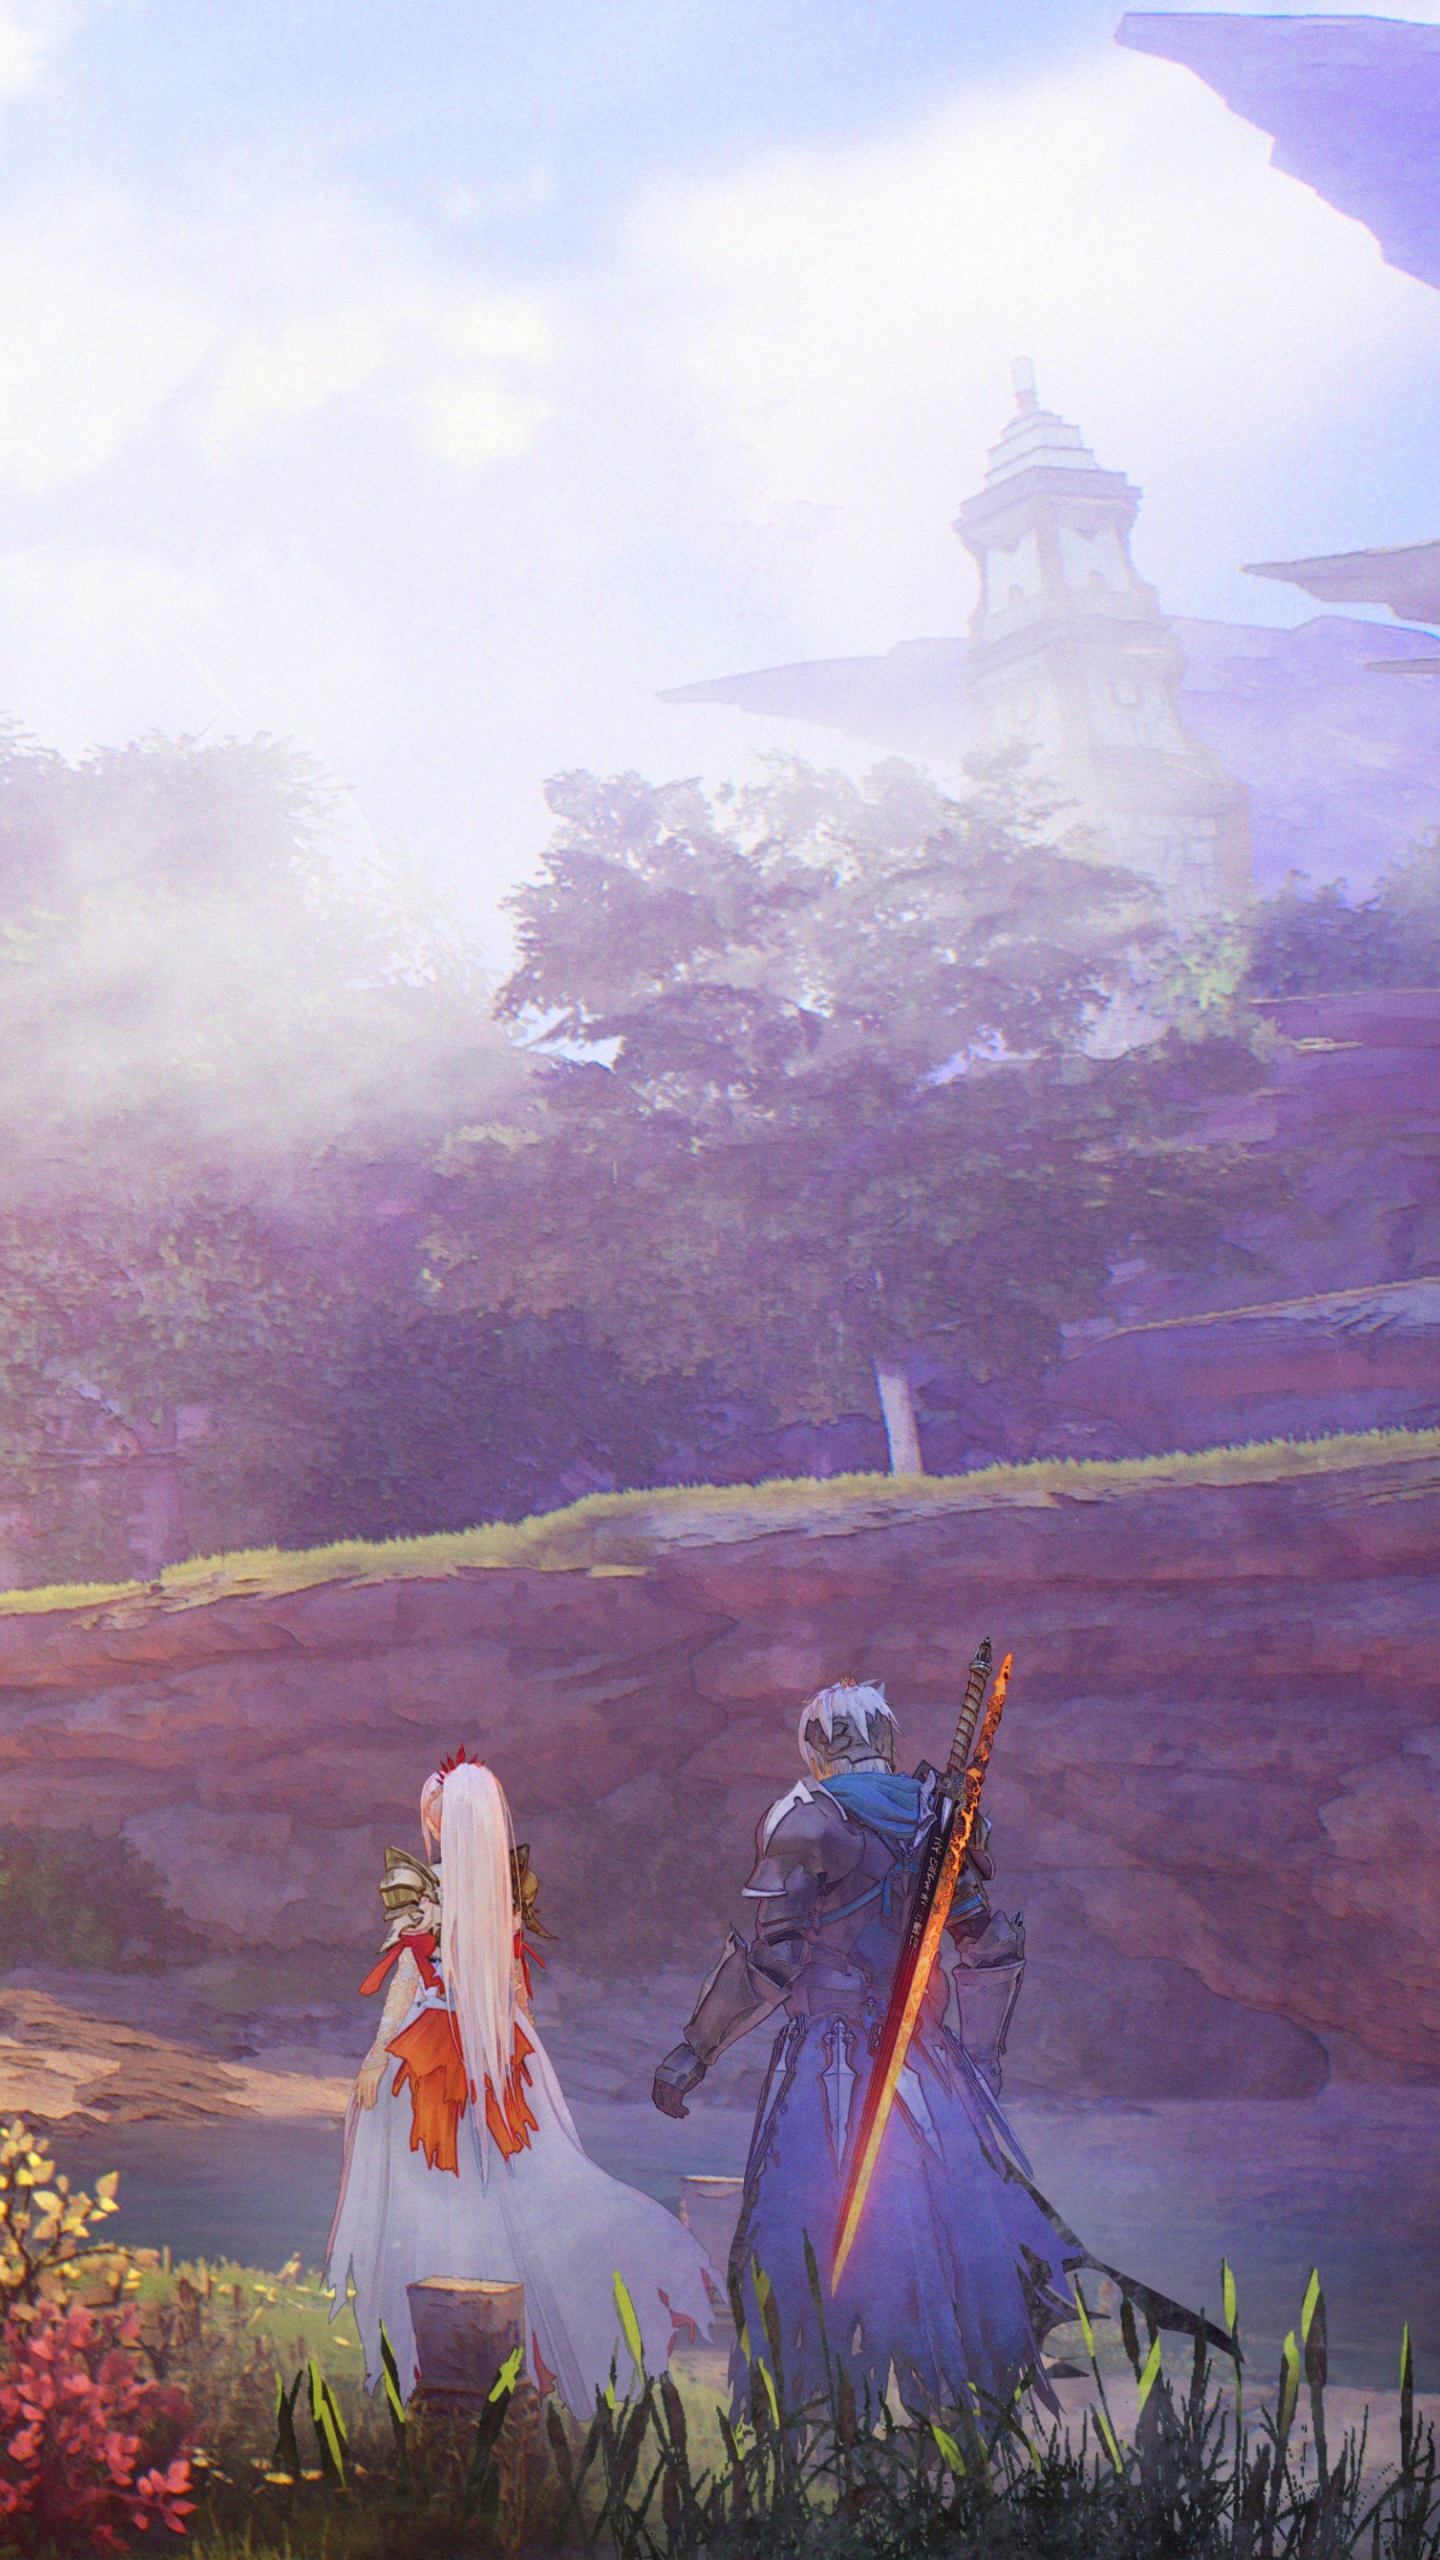 tales of arise, video game